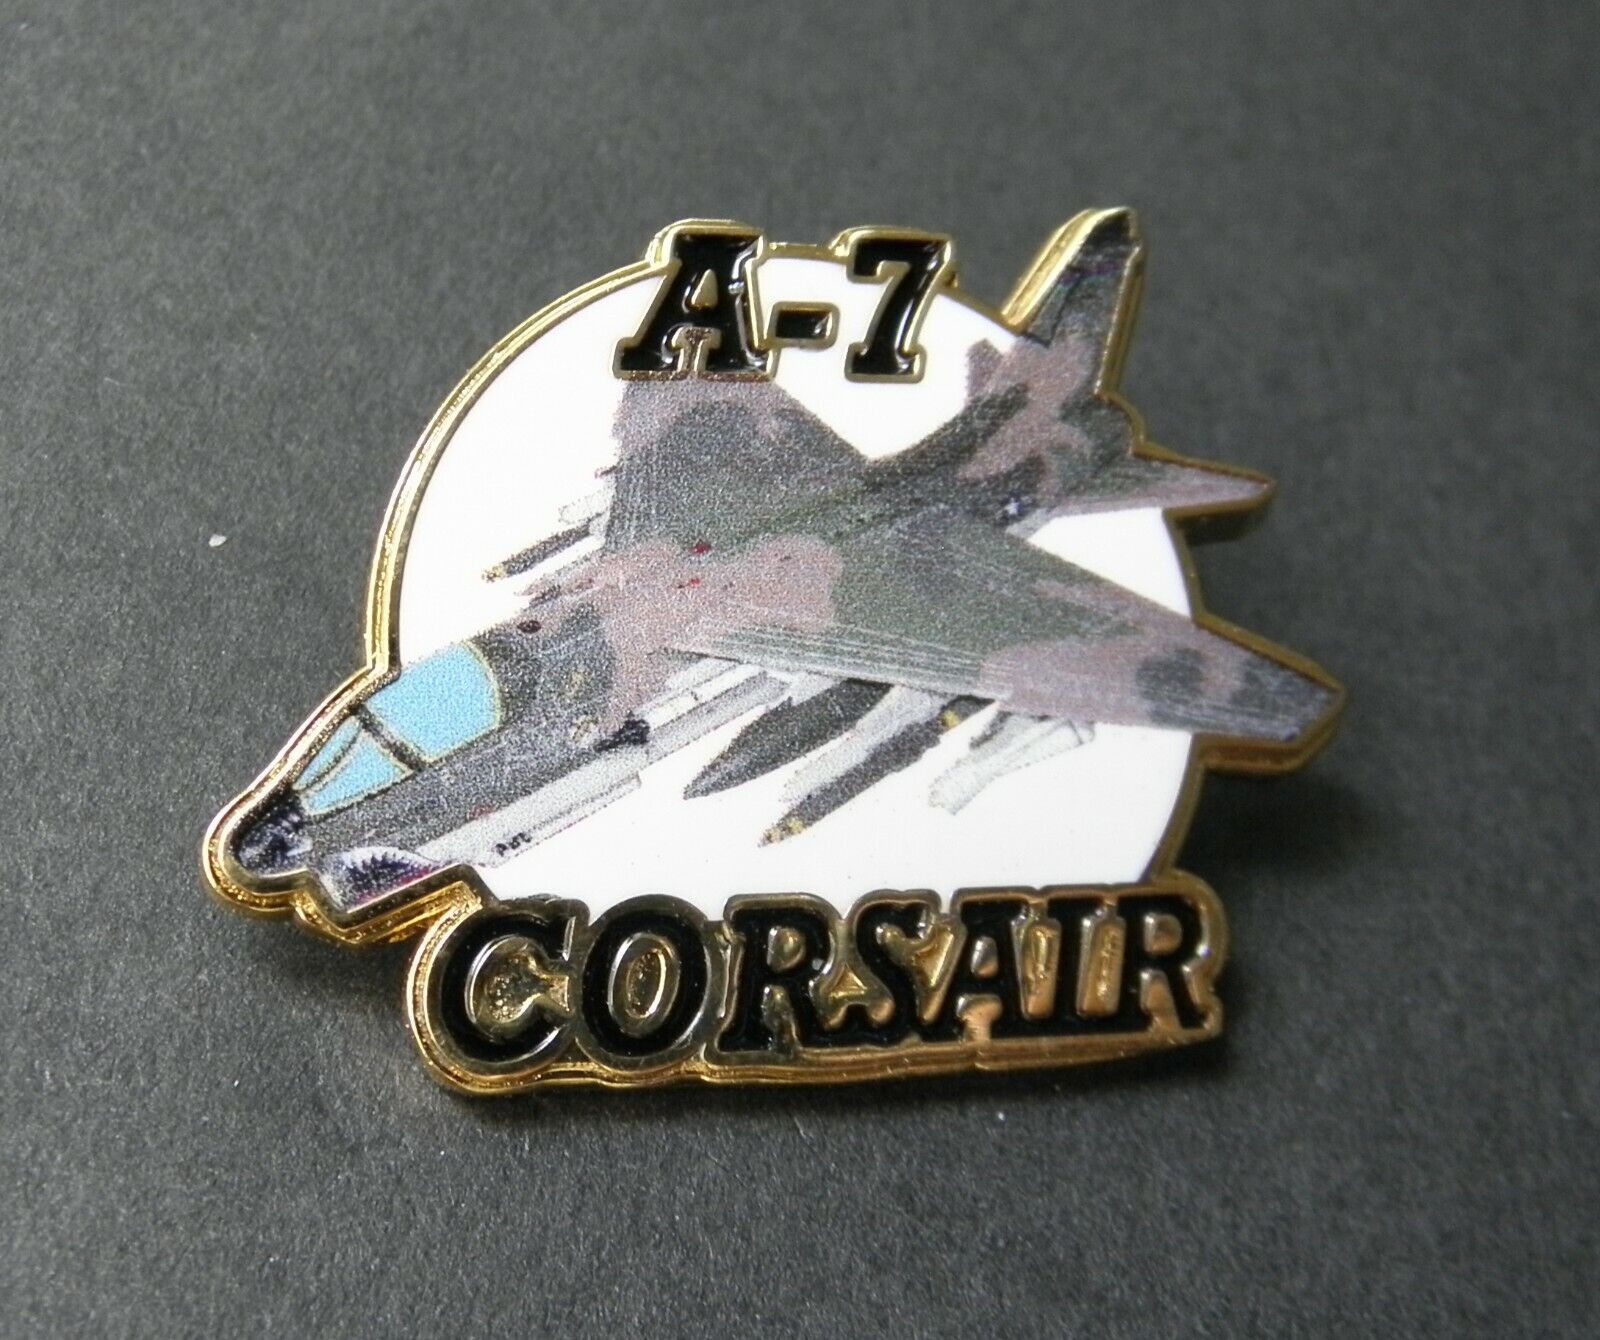 Corsair A-7D USAF Air Force Fighter Aircraft 1.3 INCHES PRINTED DESIGN